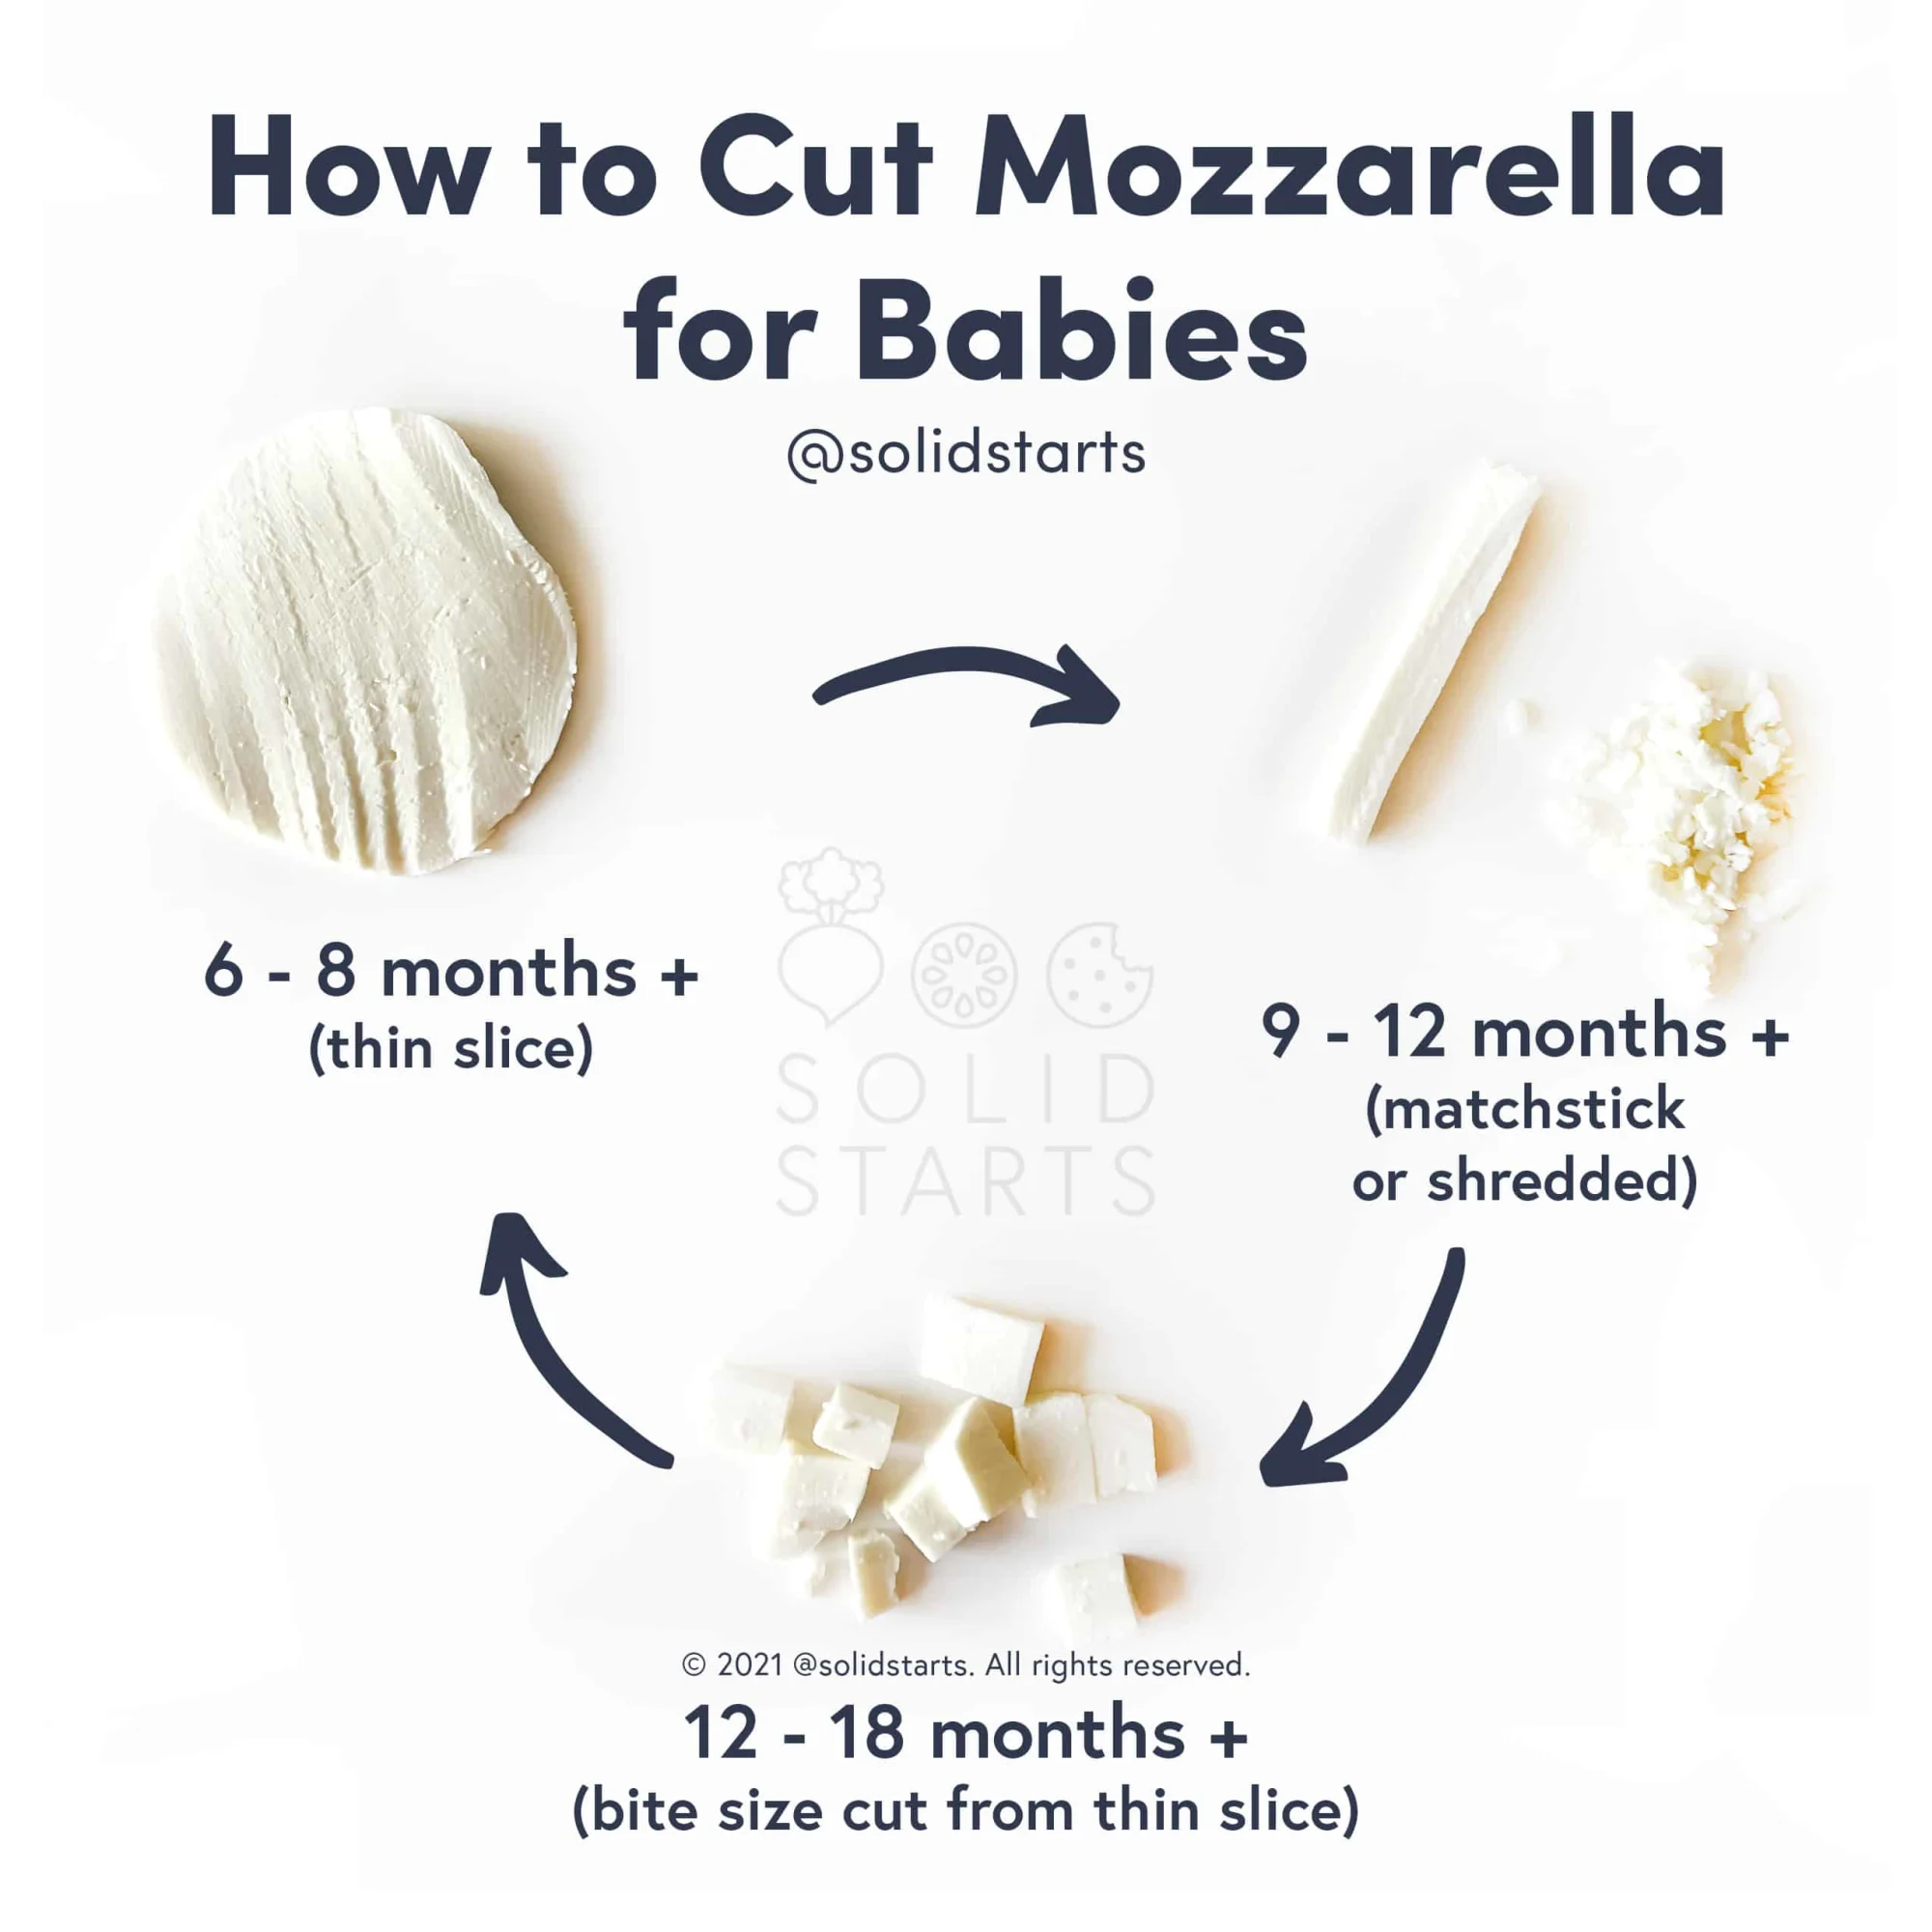 infographic titled "How to Cut Mozzarella for Babies," showing images of mozzarella cheese cut for different age ranges. Thin slices for 6-8 months+, shredded or matchstick sized pieces for 9-12 months+, and bite sized pieces for 12-18 months+